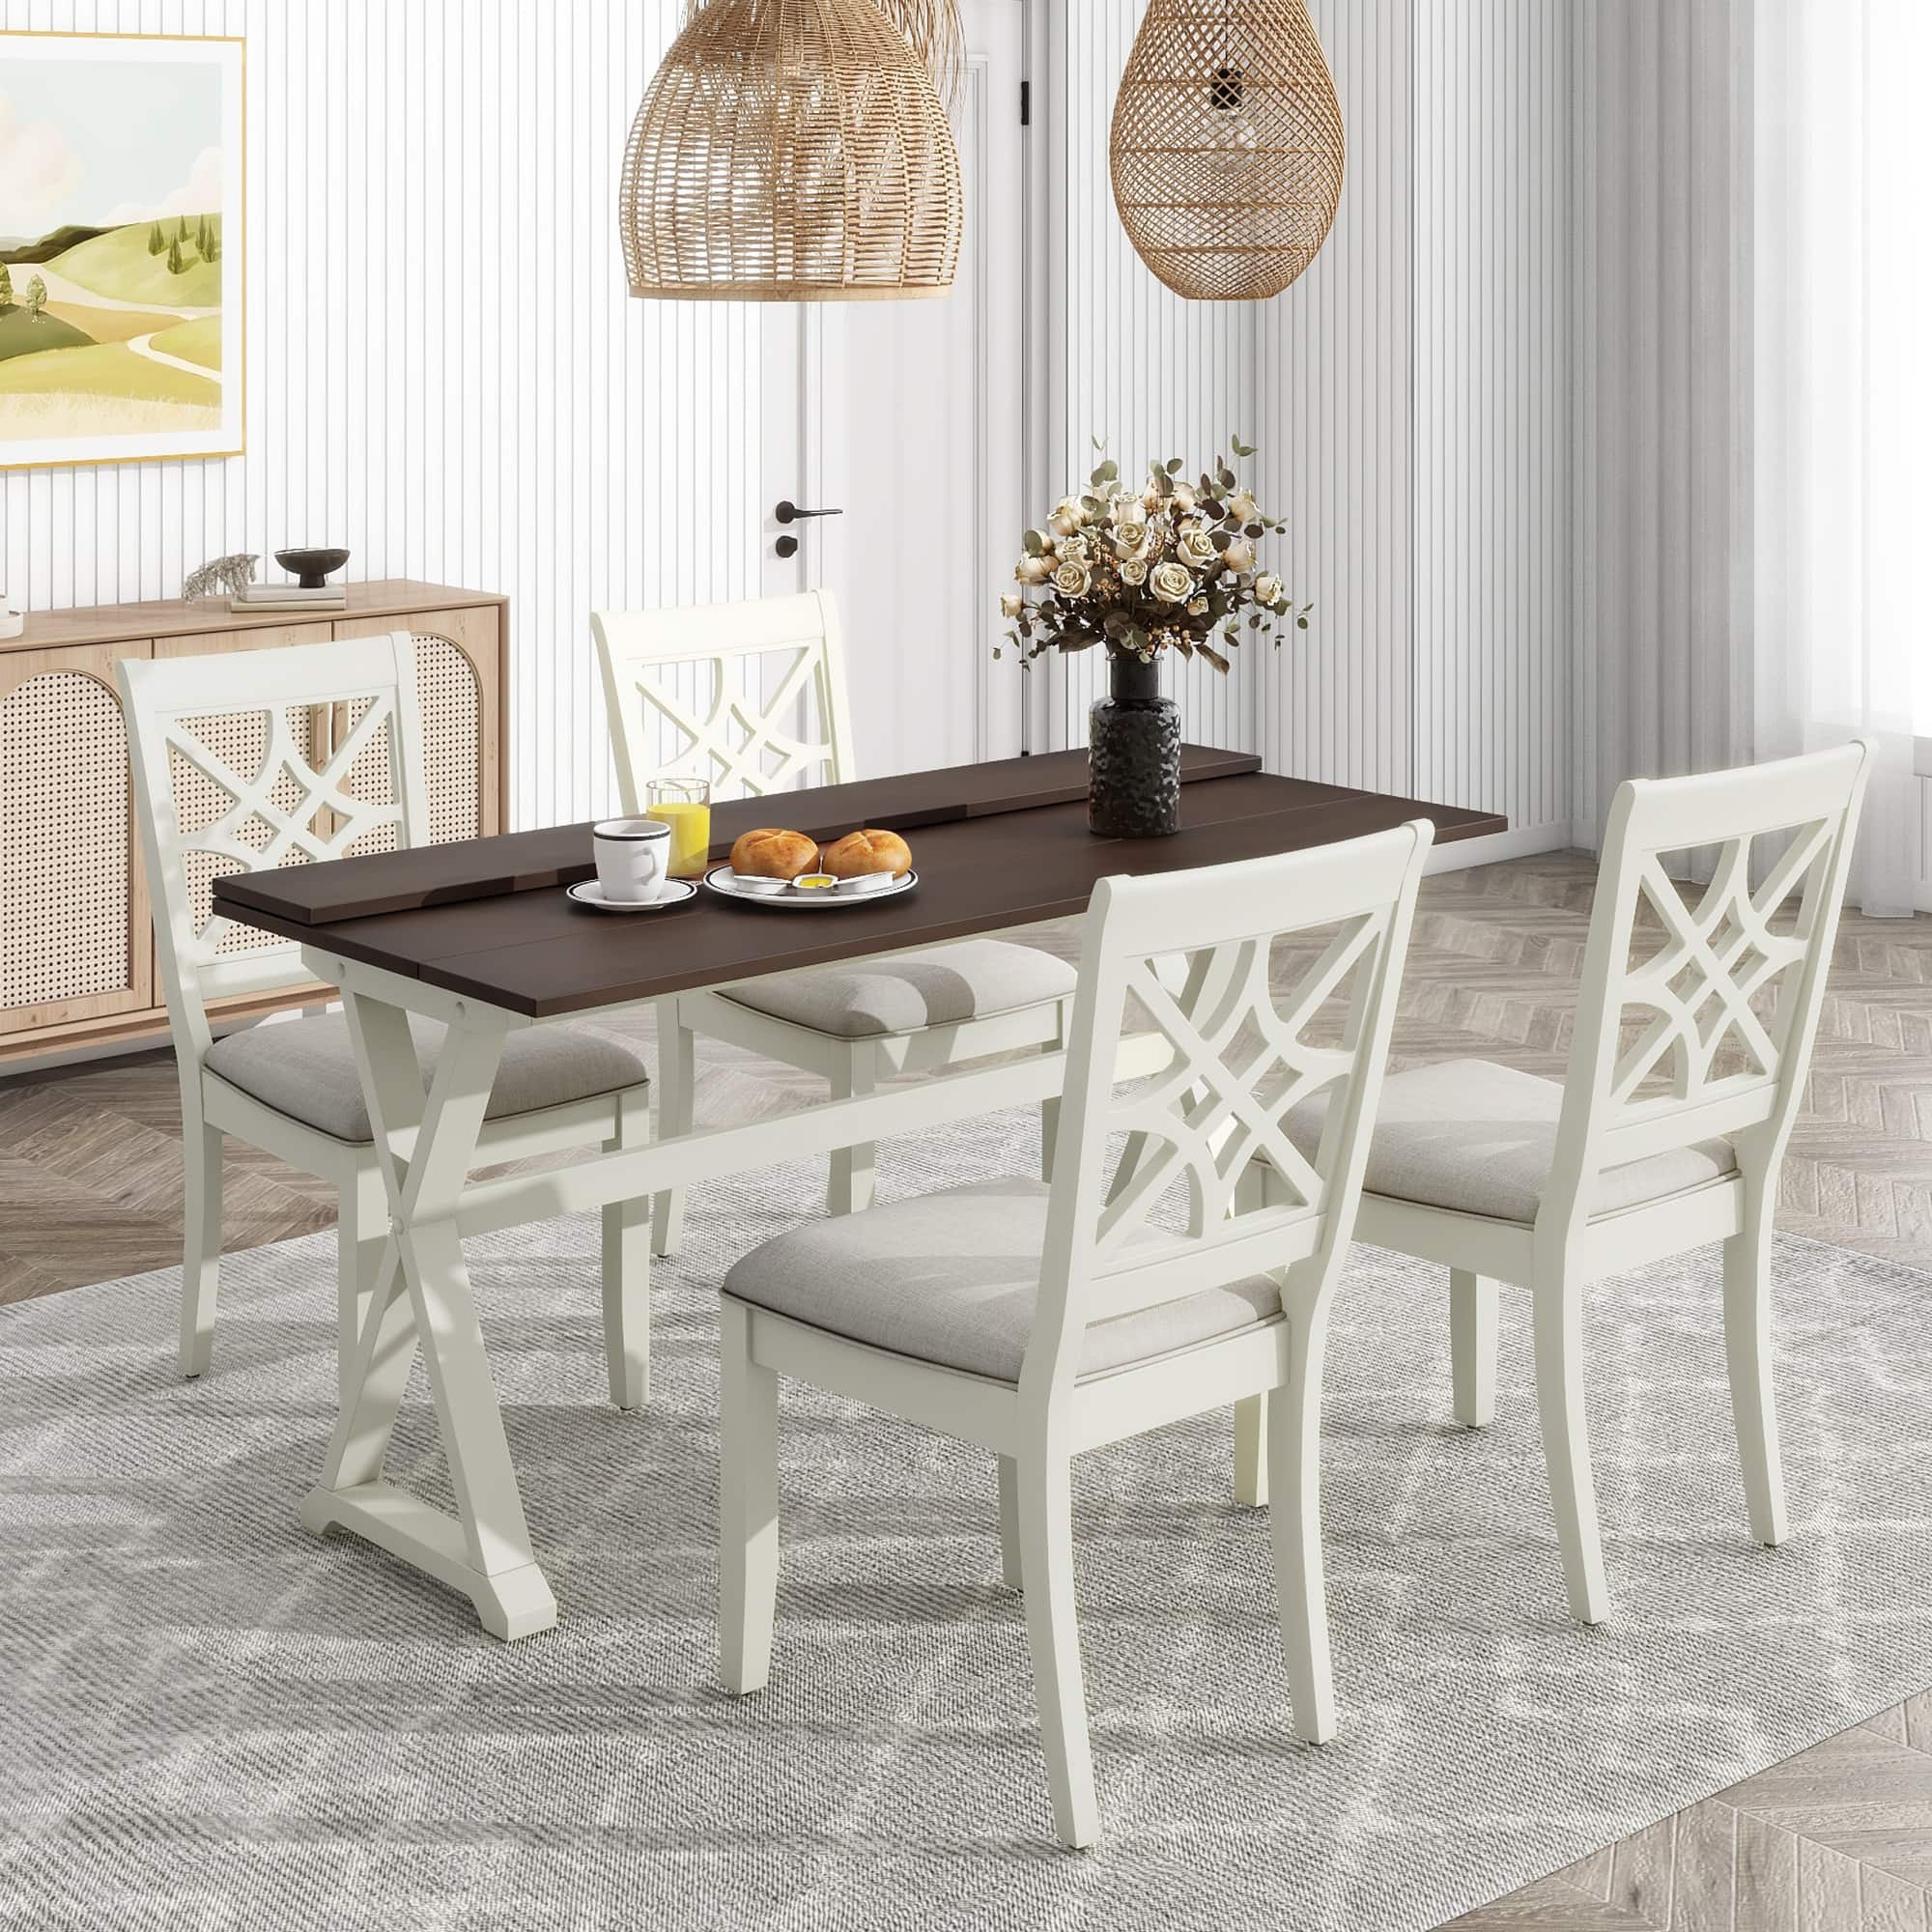 5-Piece Extendable Rubber Wood Dining Table Set with Flip Lids, Console ...